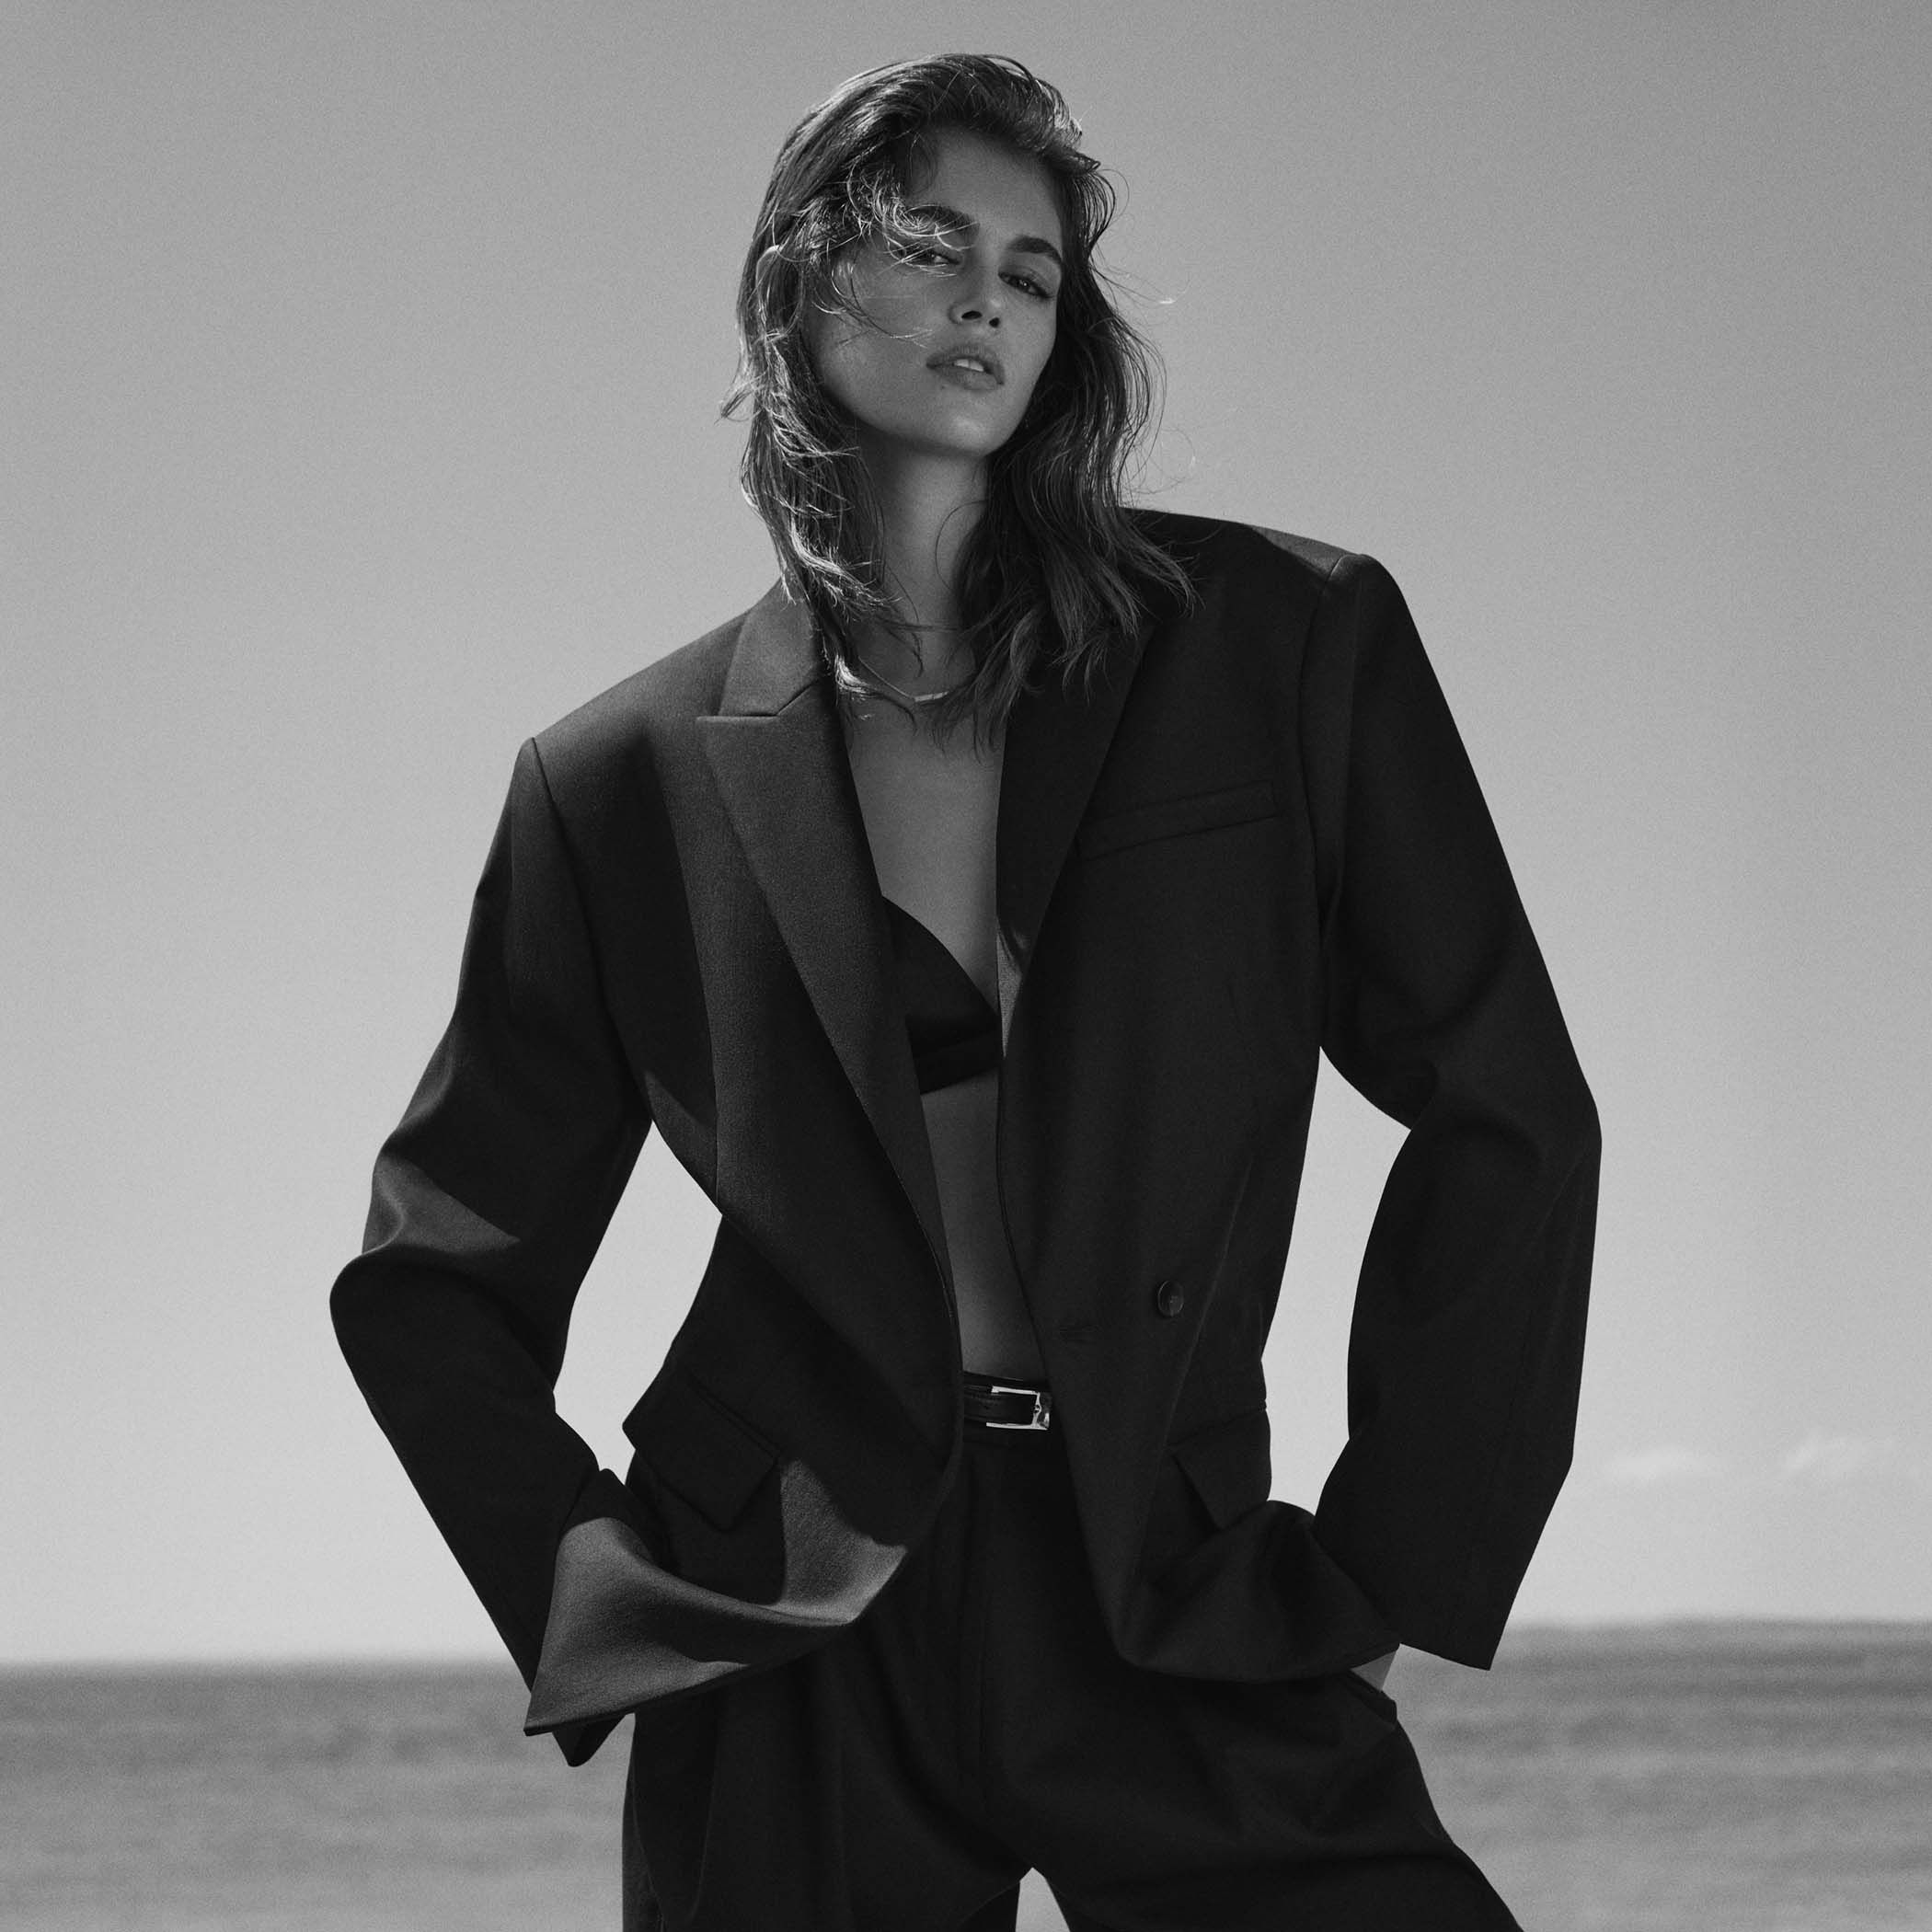 Kaia Gerber has collaborated with Zara on an affordable capsule collection